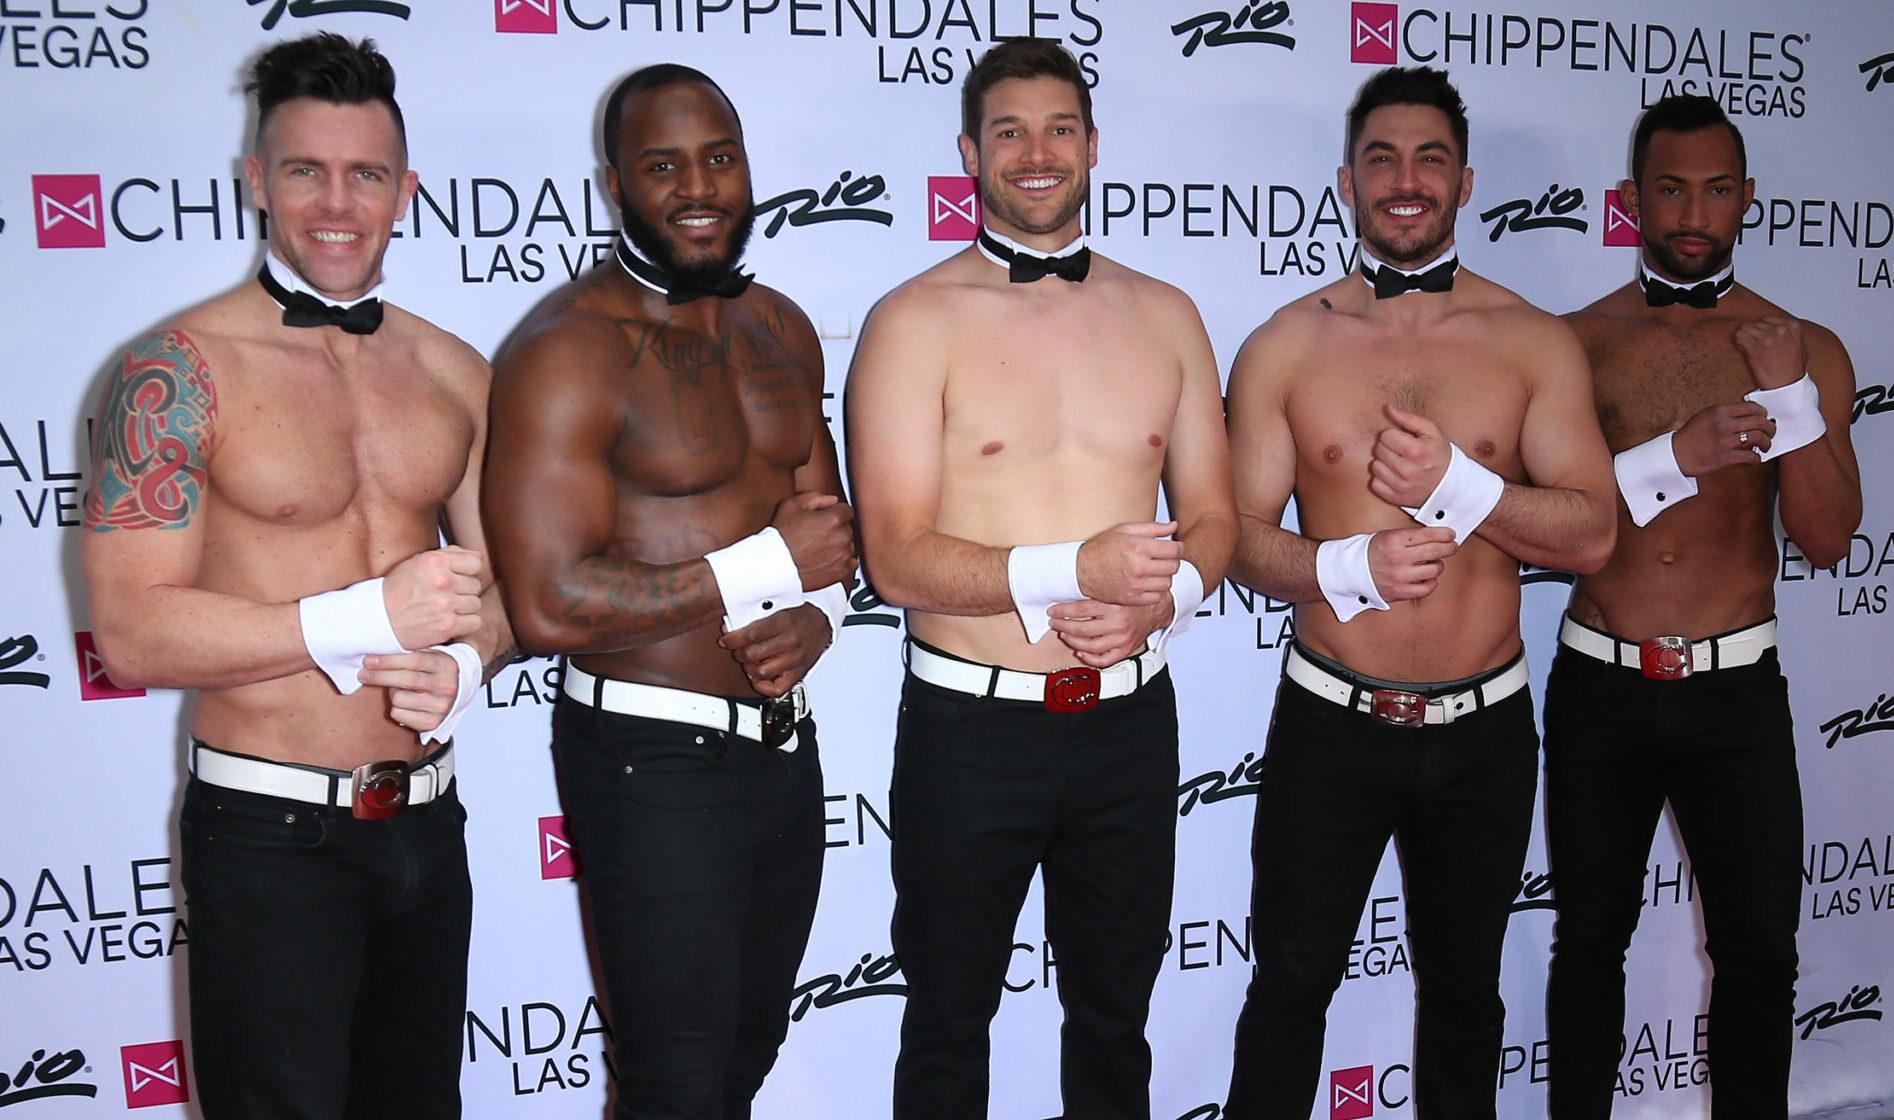 23 March 2019 - Las Vegas, NV - Garrett Yrigoyen, Chippendales. Garrett Yrigoyen from The Bachelorette guest stars in Chippendales at The Rio supported by Becca Kufrin, Tia Booth and Caroline Lunny.